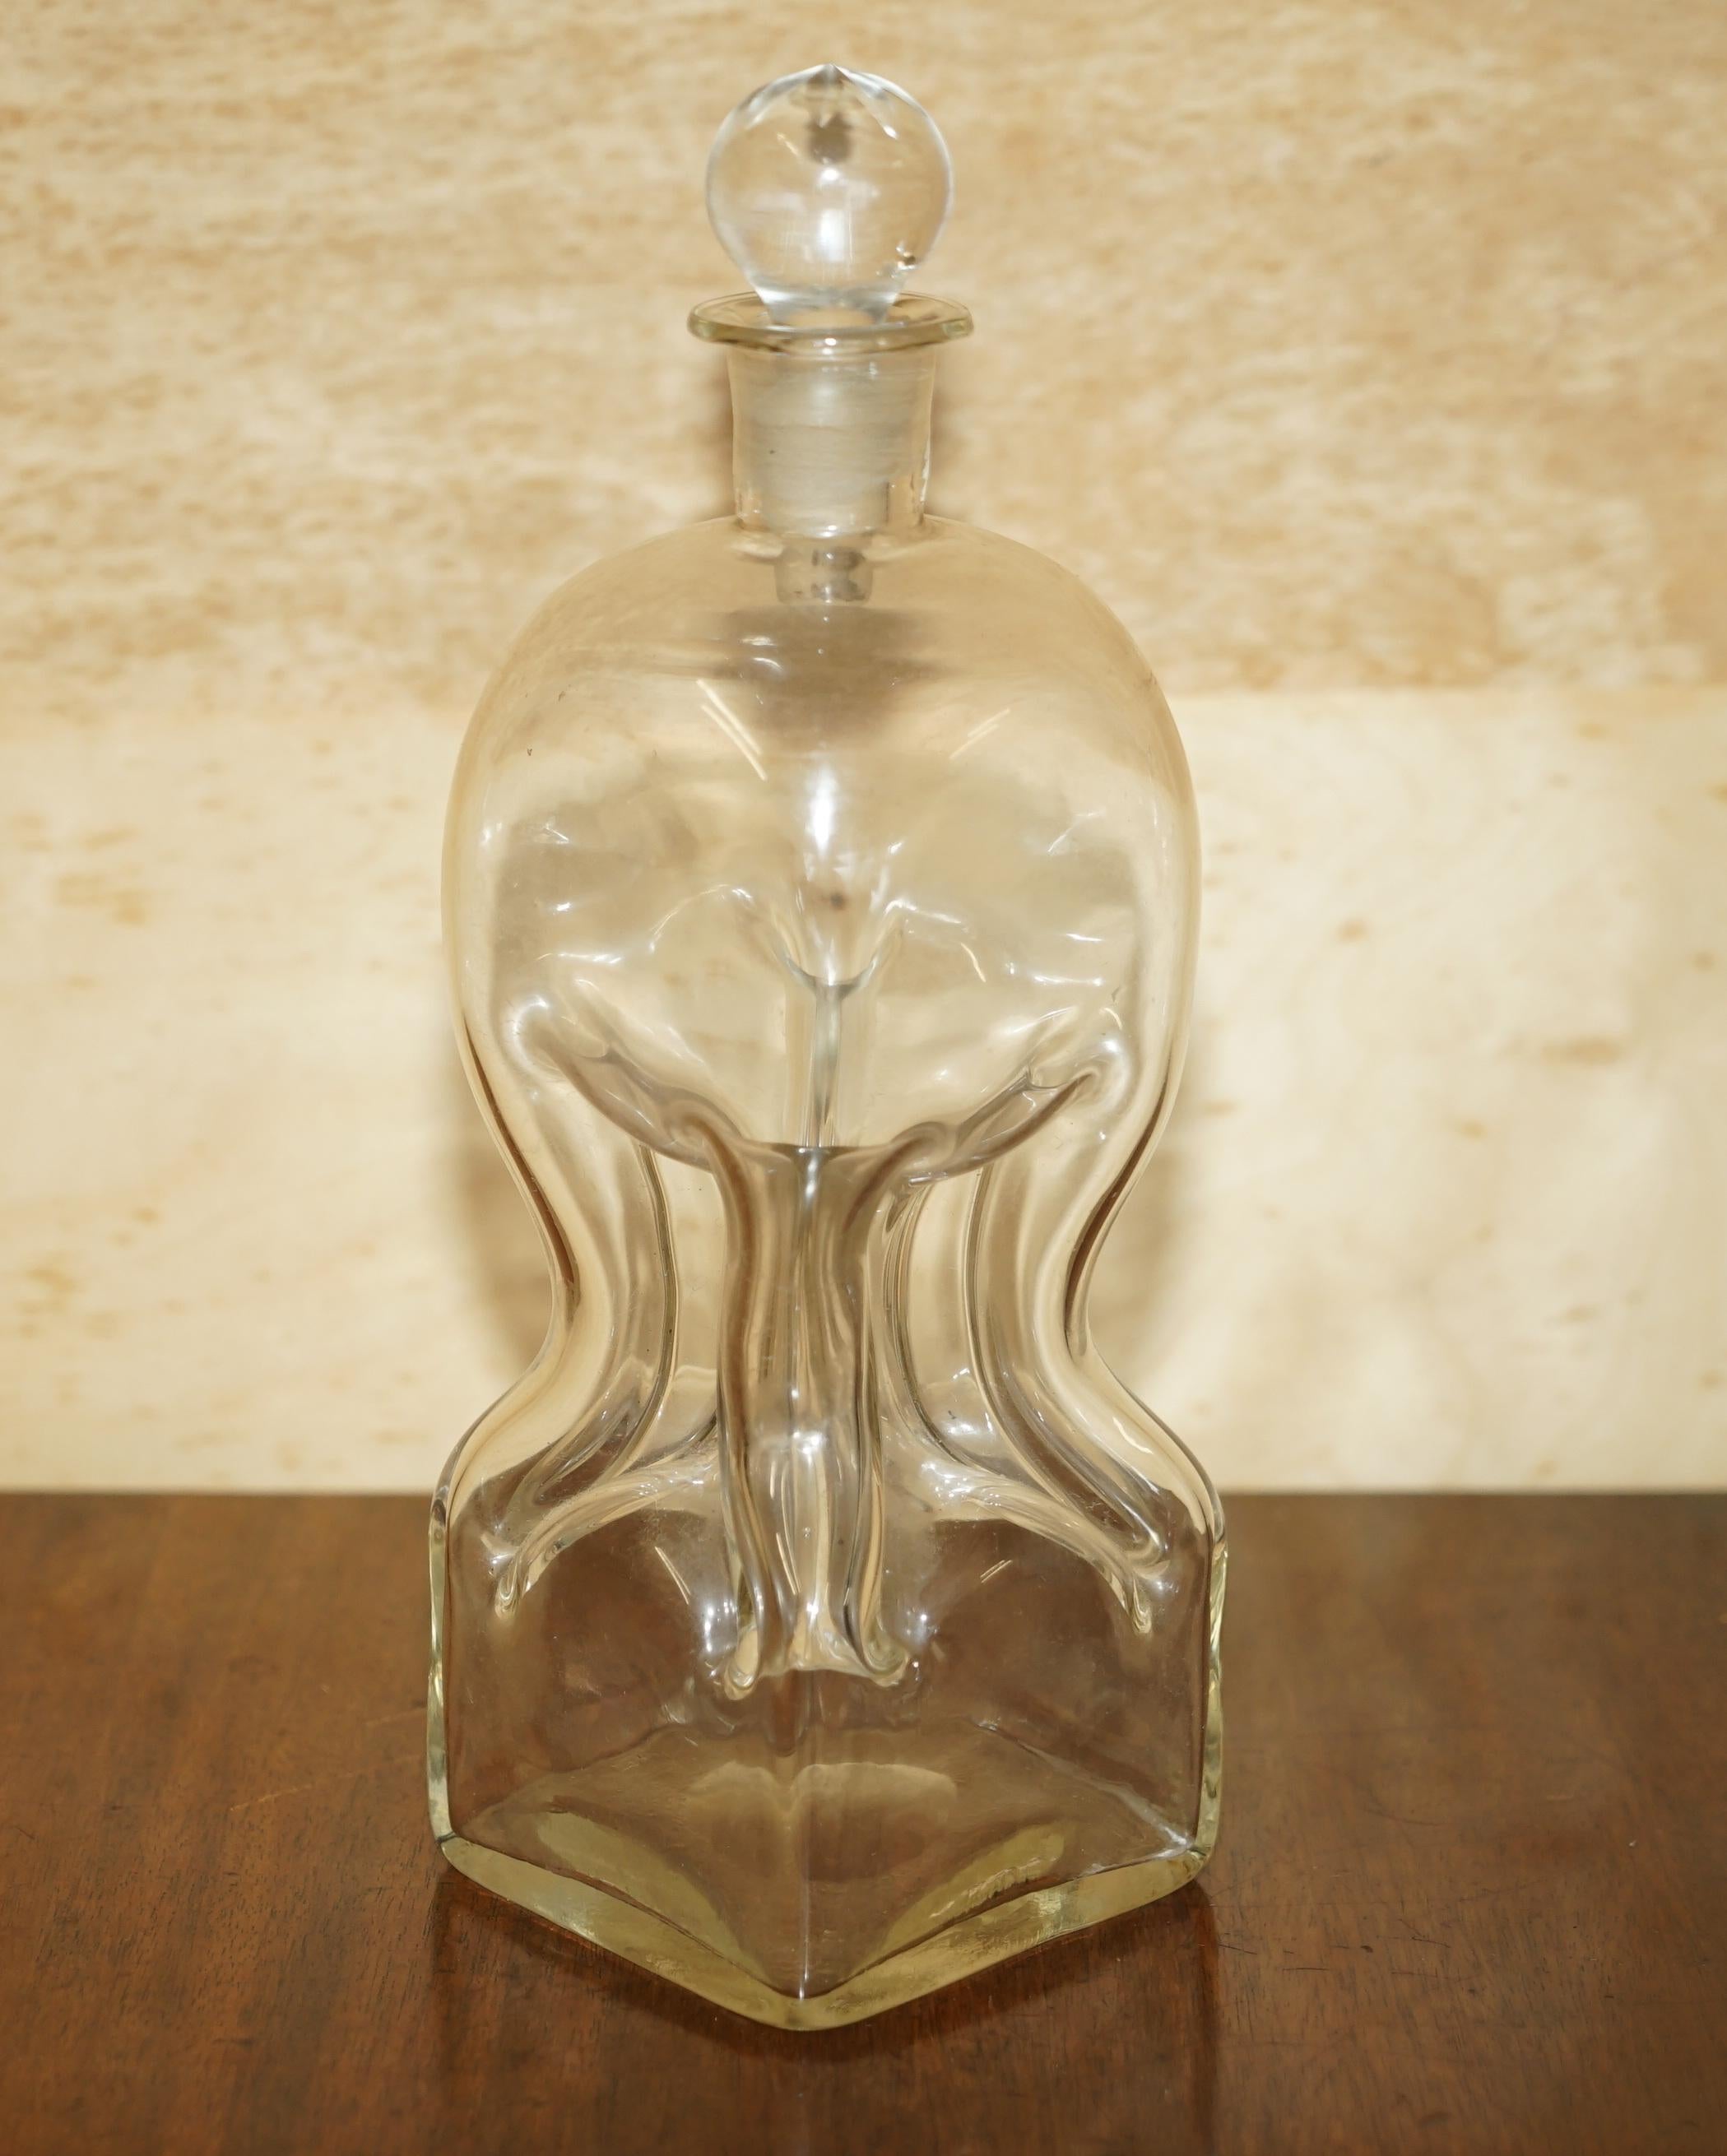 We are delighted to offer for sale this sublime pair of antique pinch decanters.

A good looking and decorative pair, ideally suited to hose some golden colour liquor so you can see all the lines accentuated.

The condition is good used and